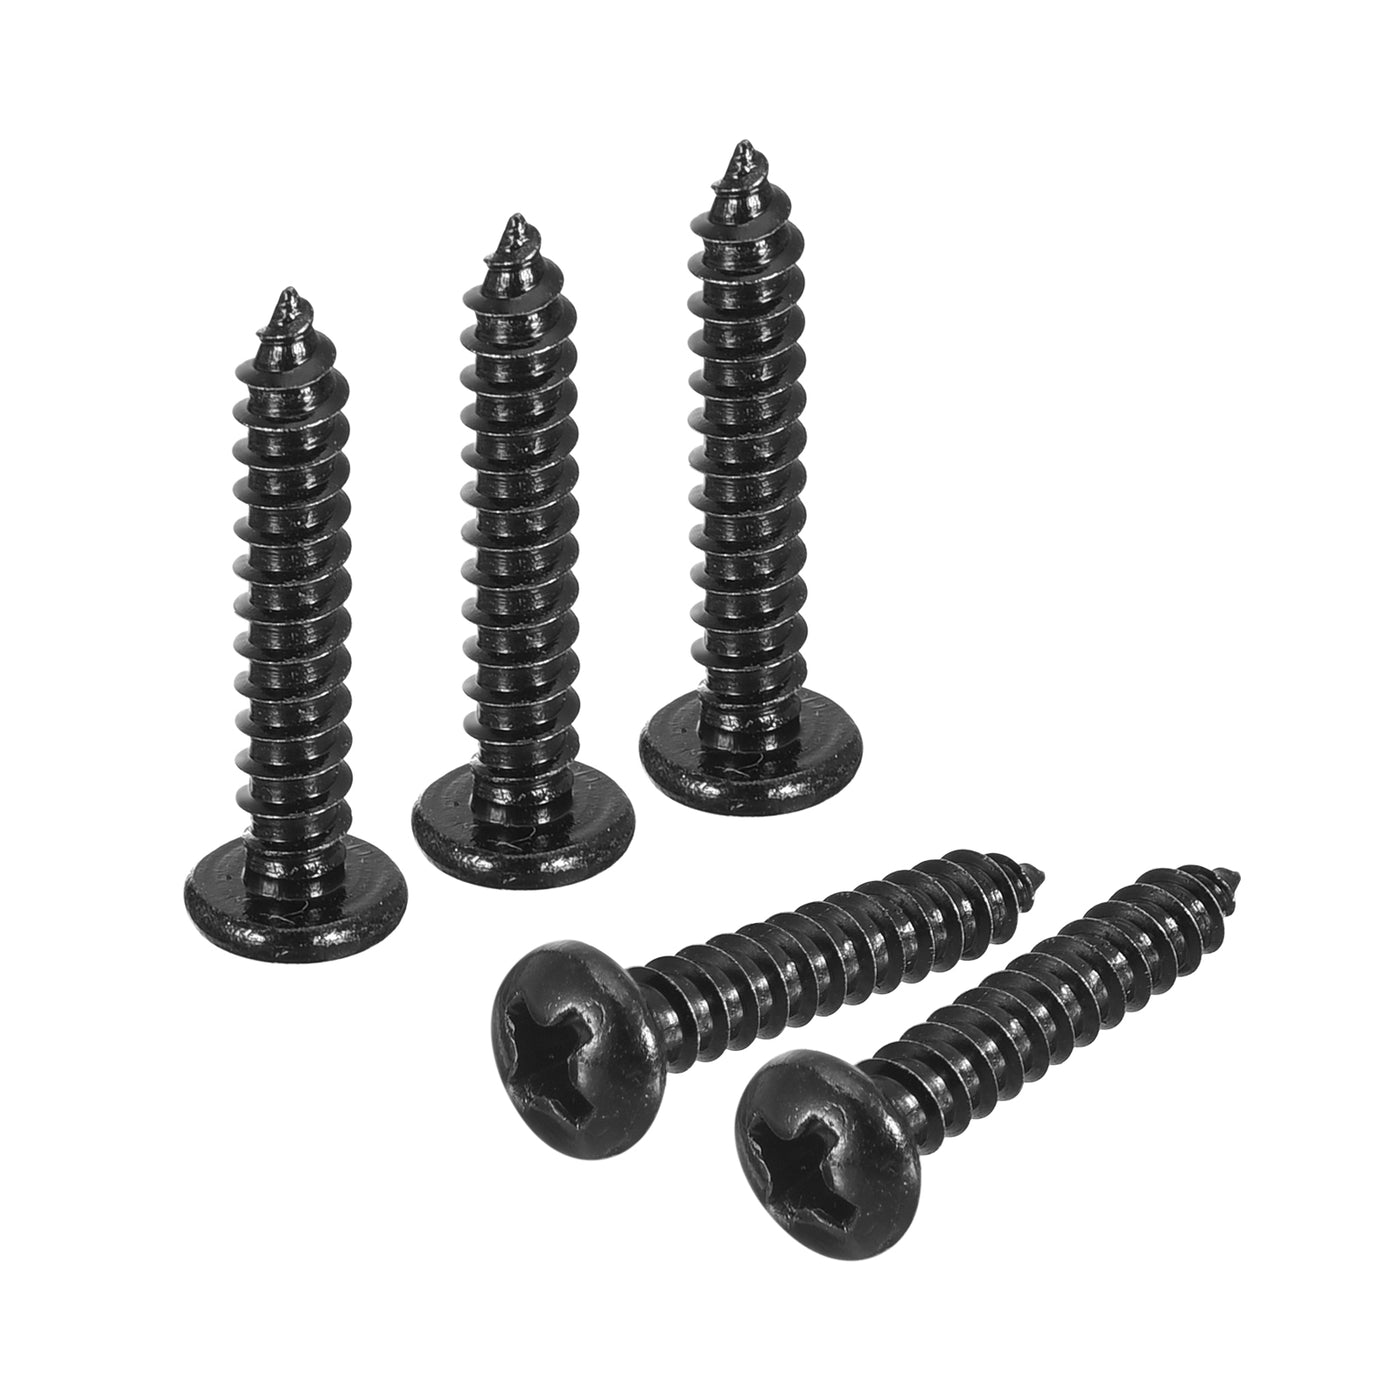 uxcell Uxcell #6 x 3/4" Phillips Pan Head Self-tapping Screw, 100pcs - 304 Stainless Steel Round Head Wood Screw Full Thread (Black)